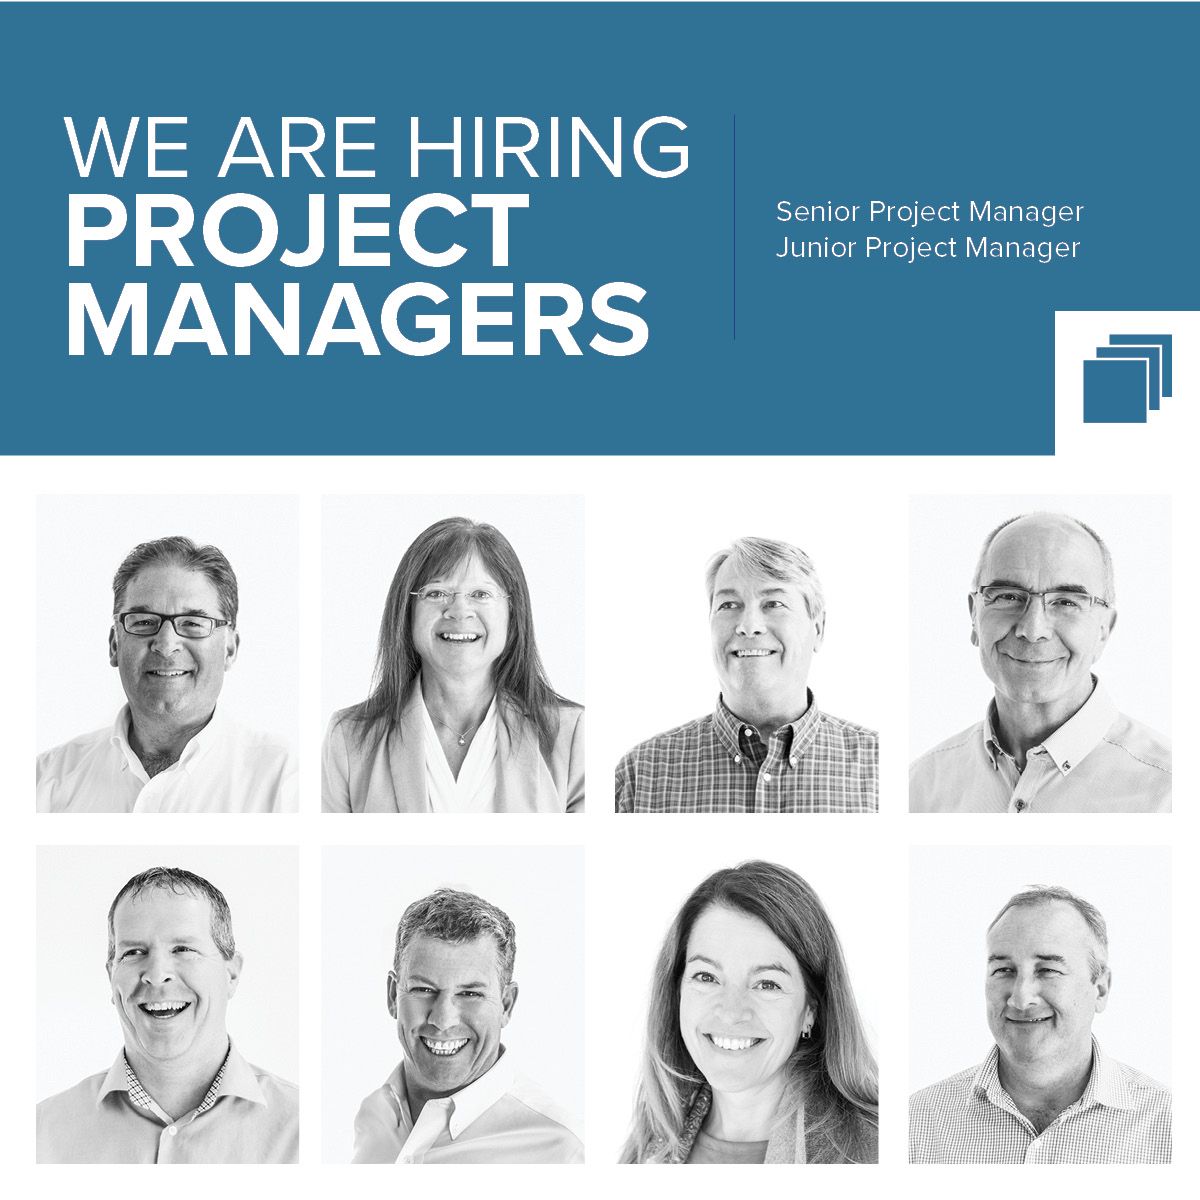 AGNORA is Hiring Project Managers